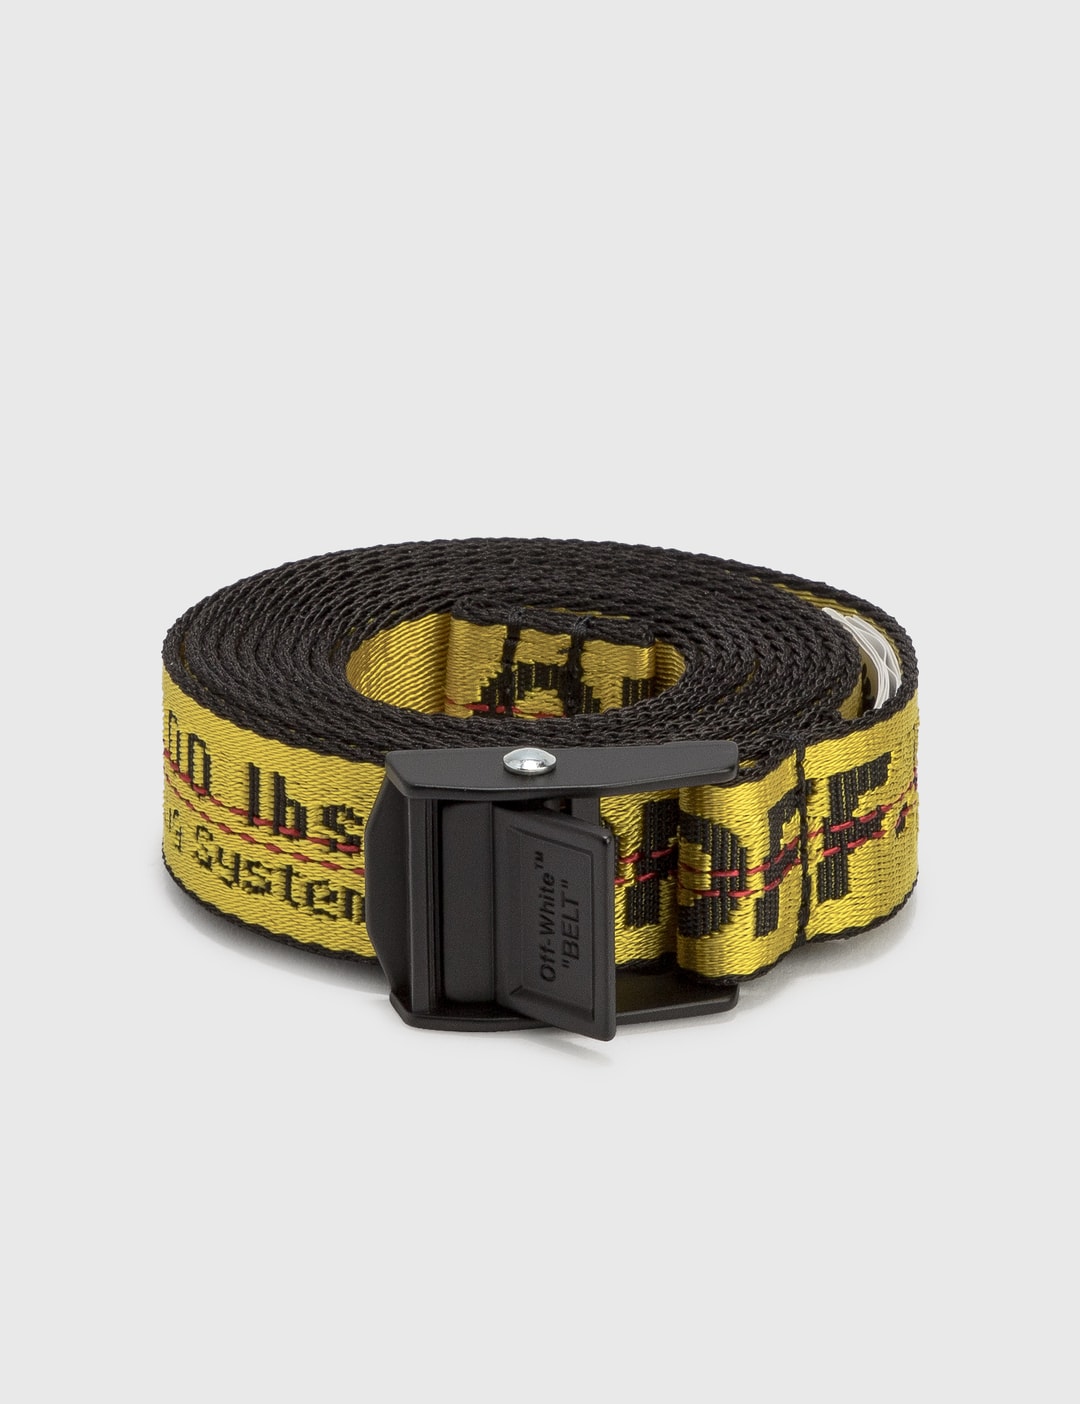 by Globally - - HBX Mini | Lifestyle and Belt Industrial Curated Fashion Hypebeast Off-White™